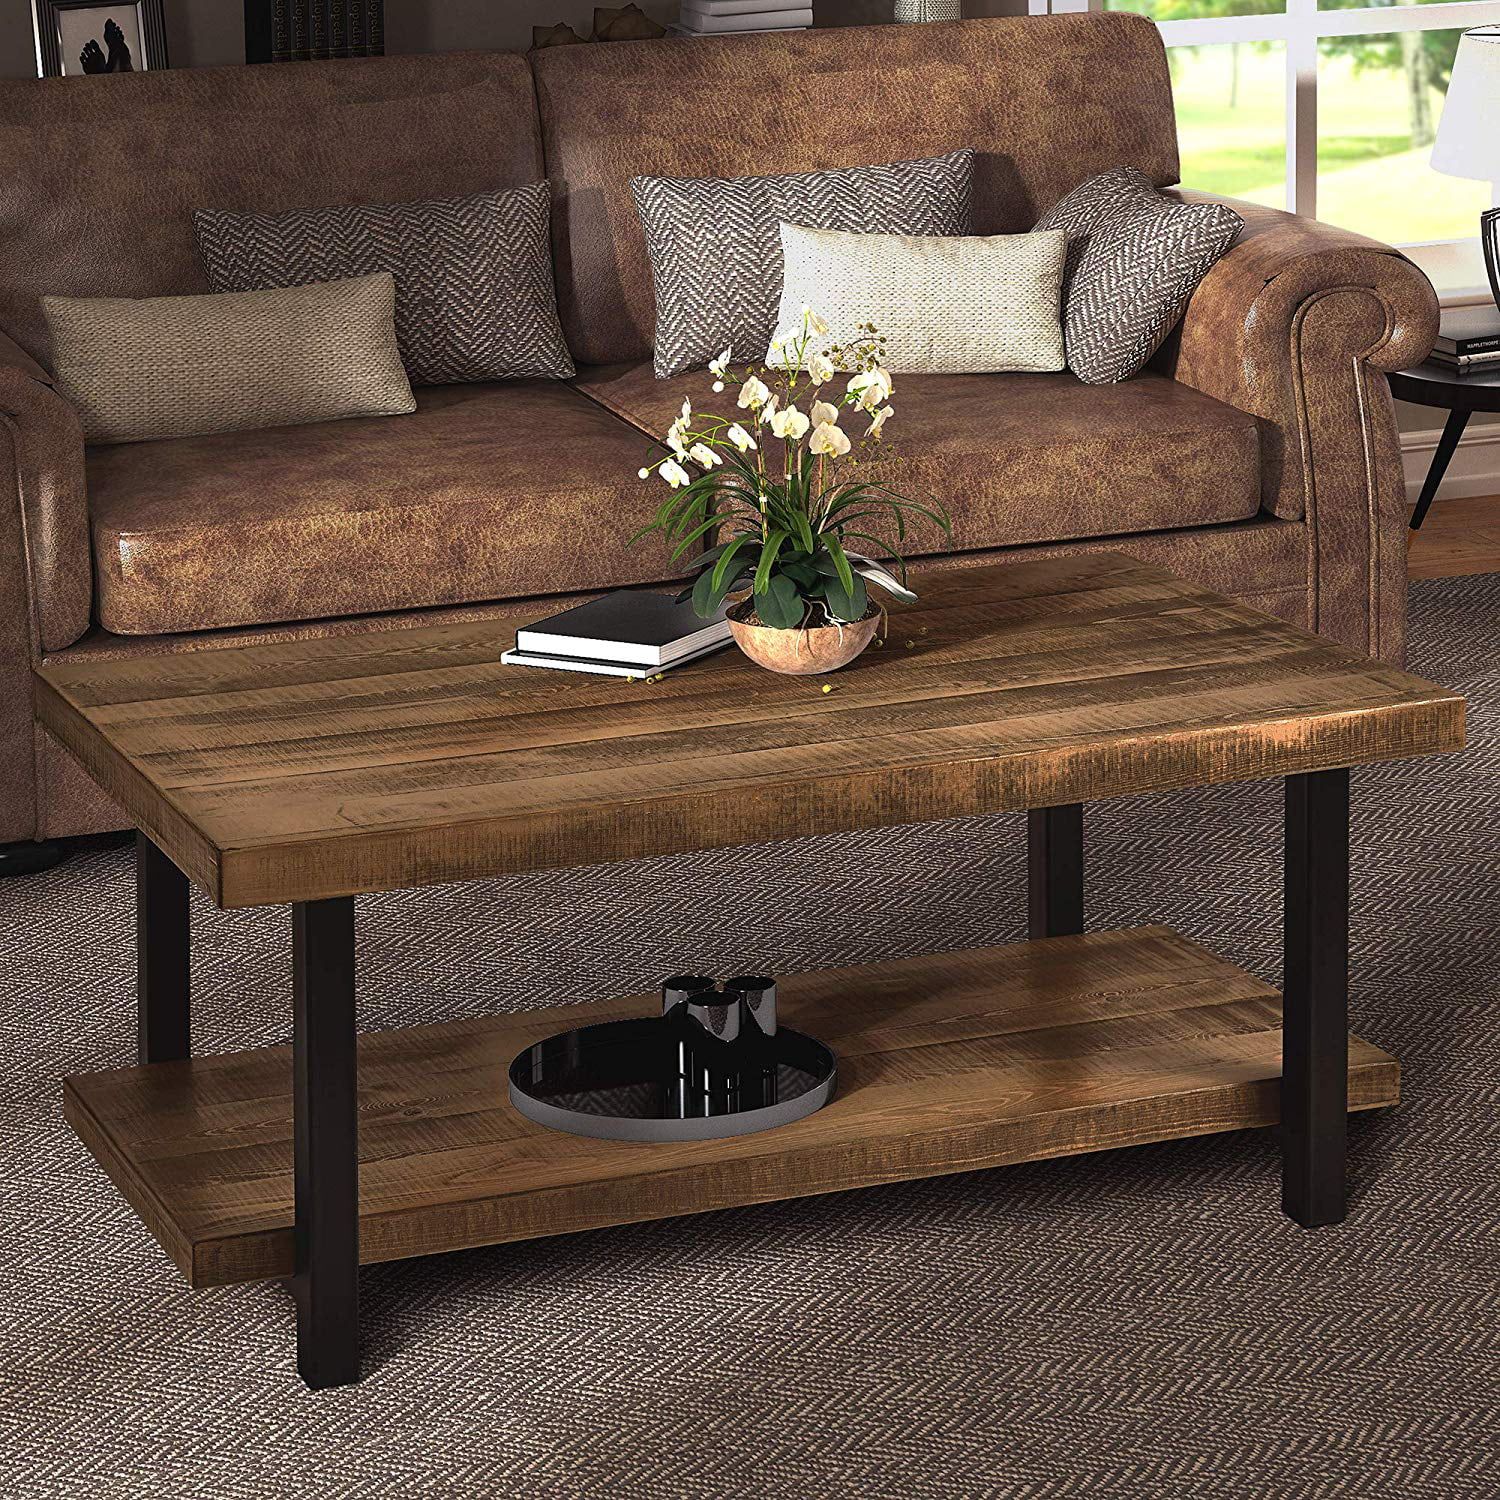 Harper&bright Designs Industrial Rectangular Pine Wood Coffee Table With Regard To Rustic Coffee Tables (Gallery 10 of 20)